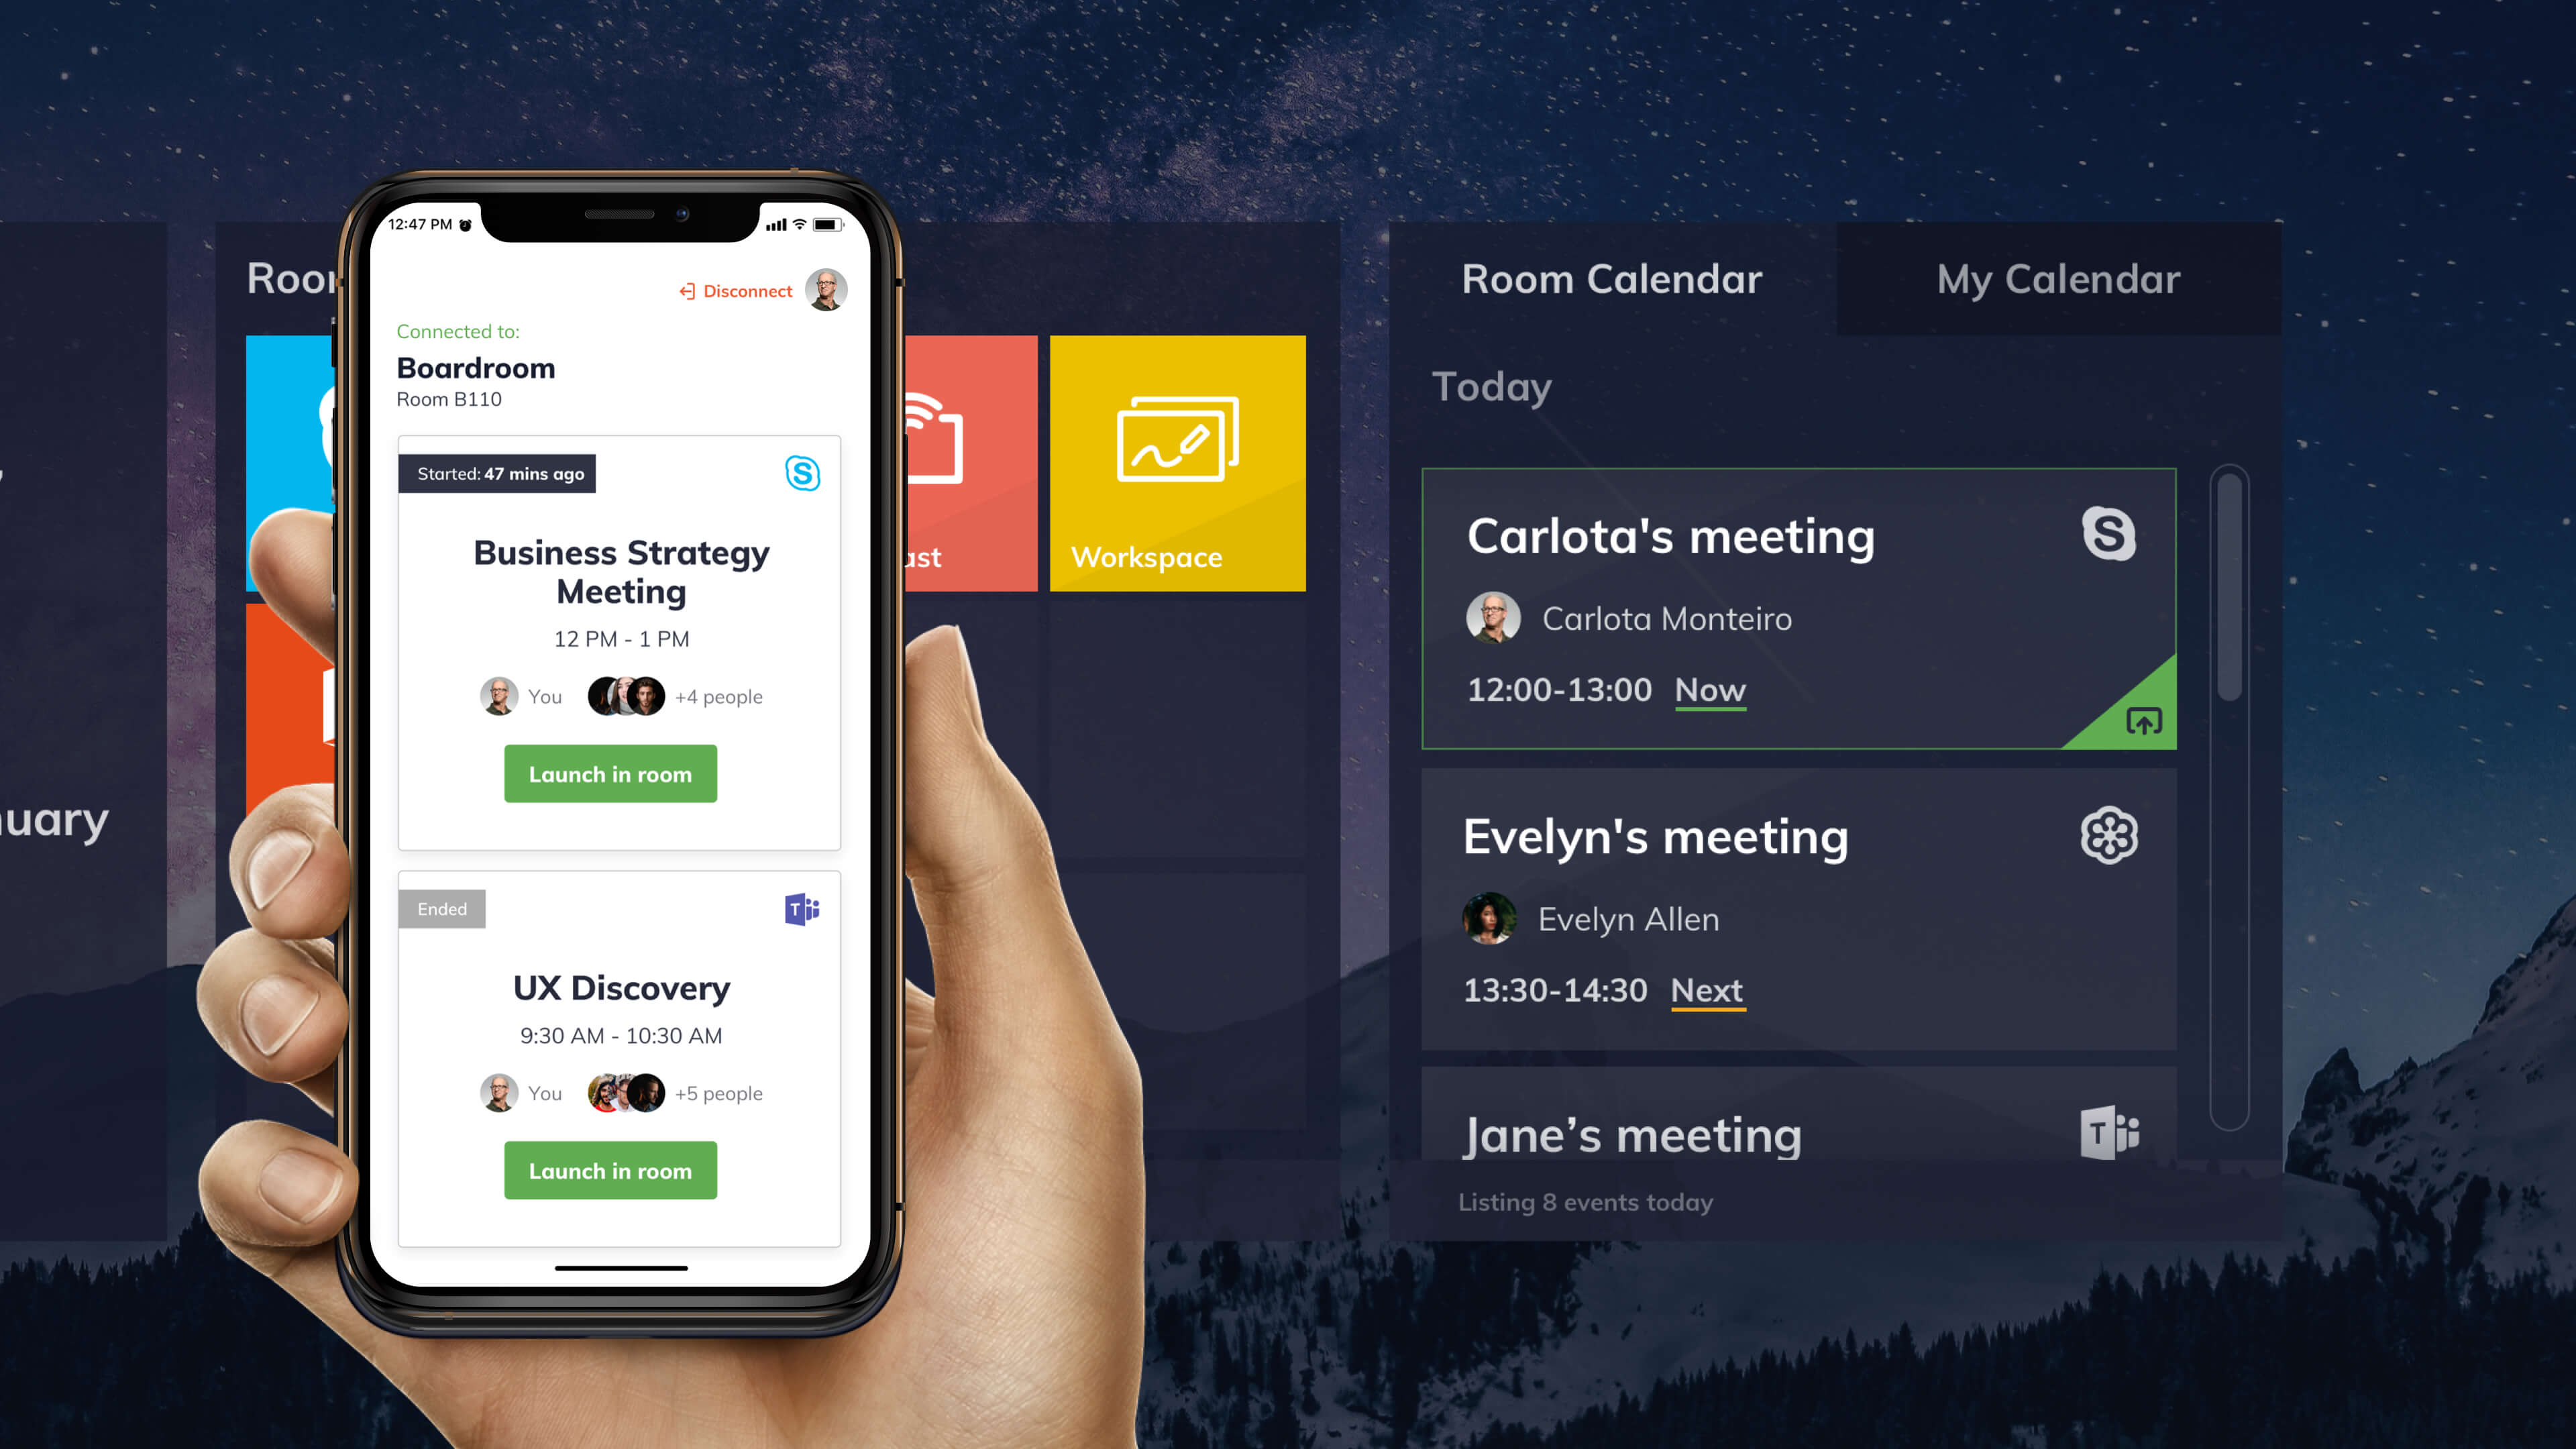 A more organized home screen for meeting room displays